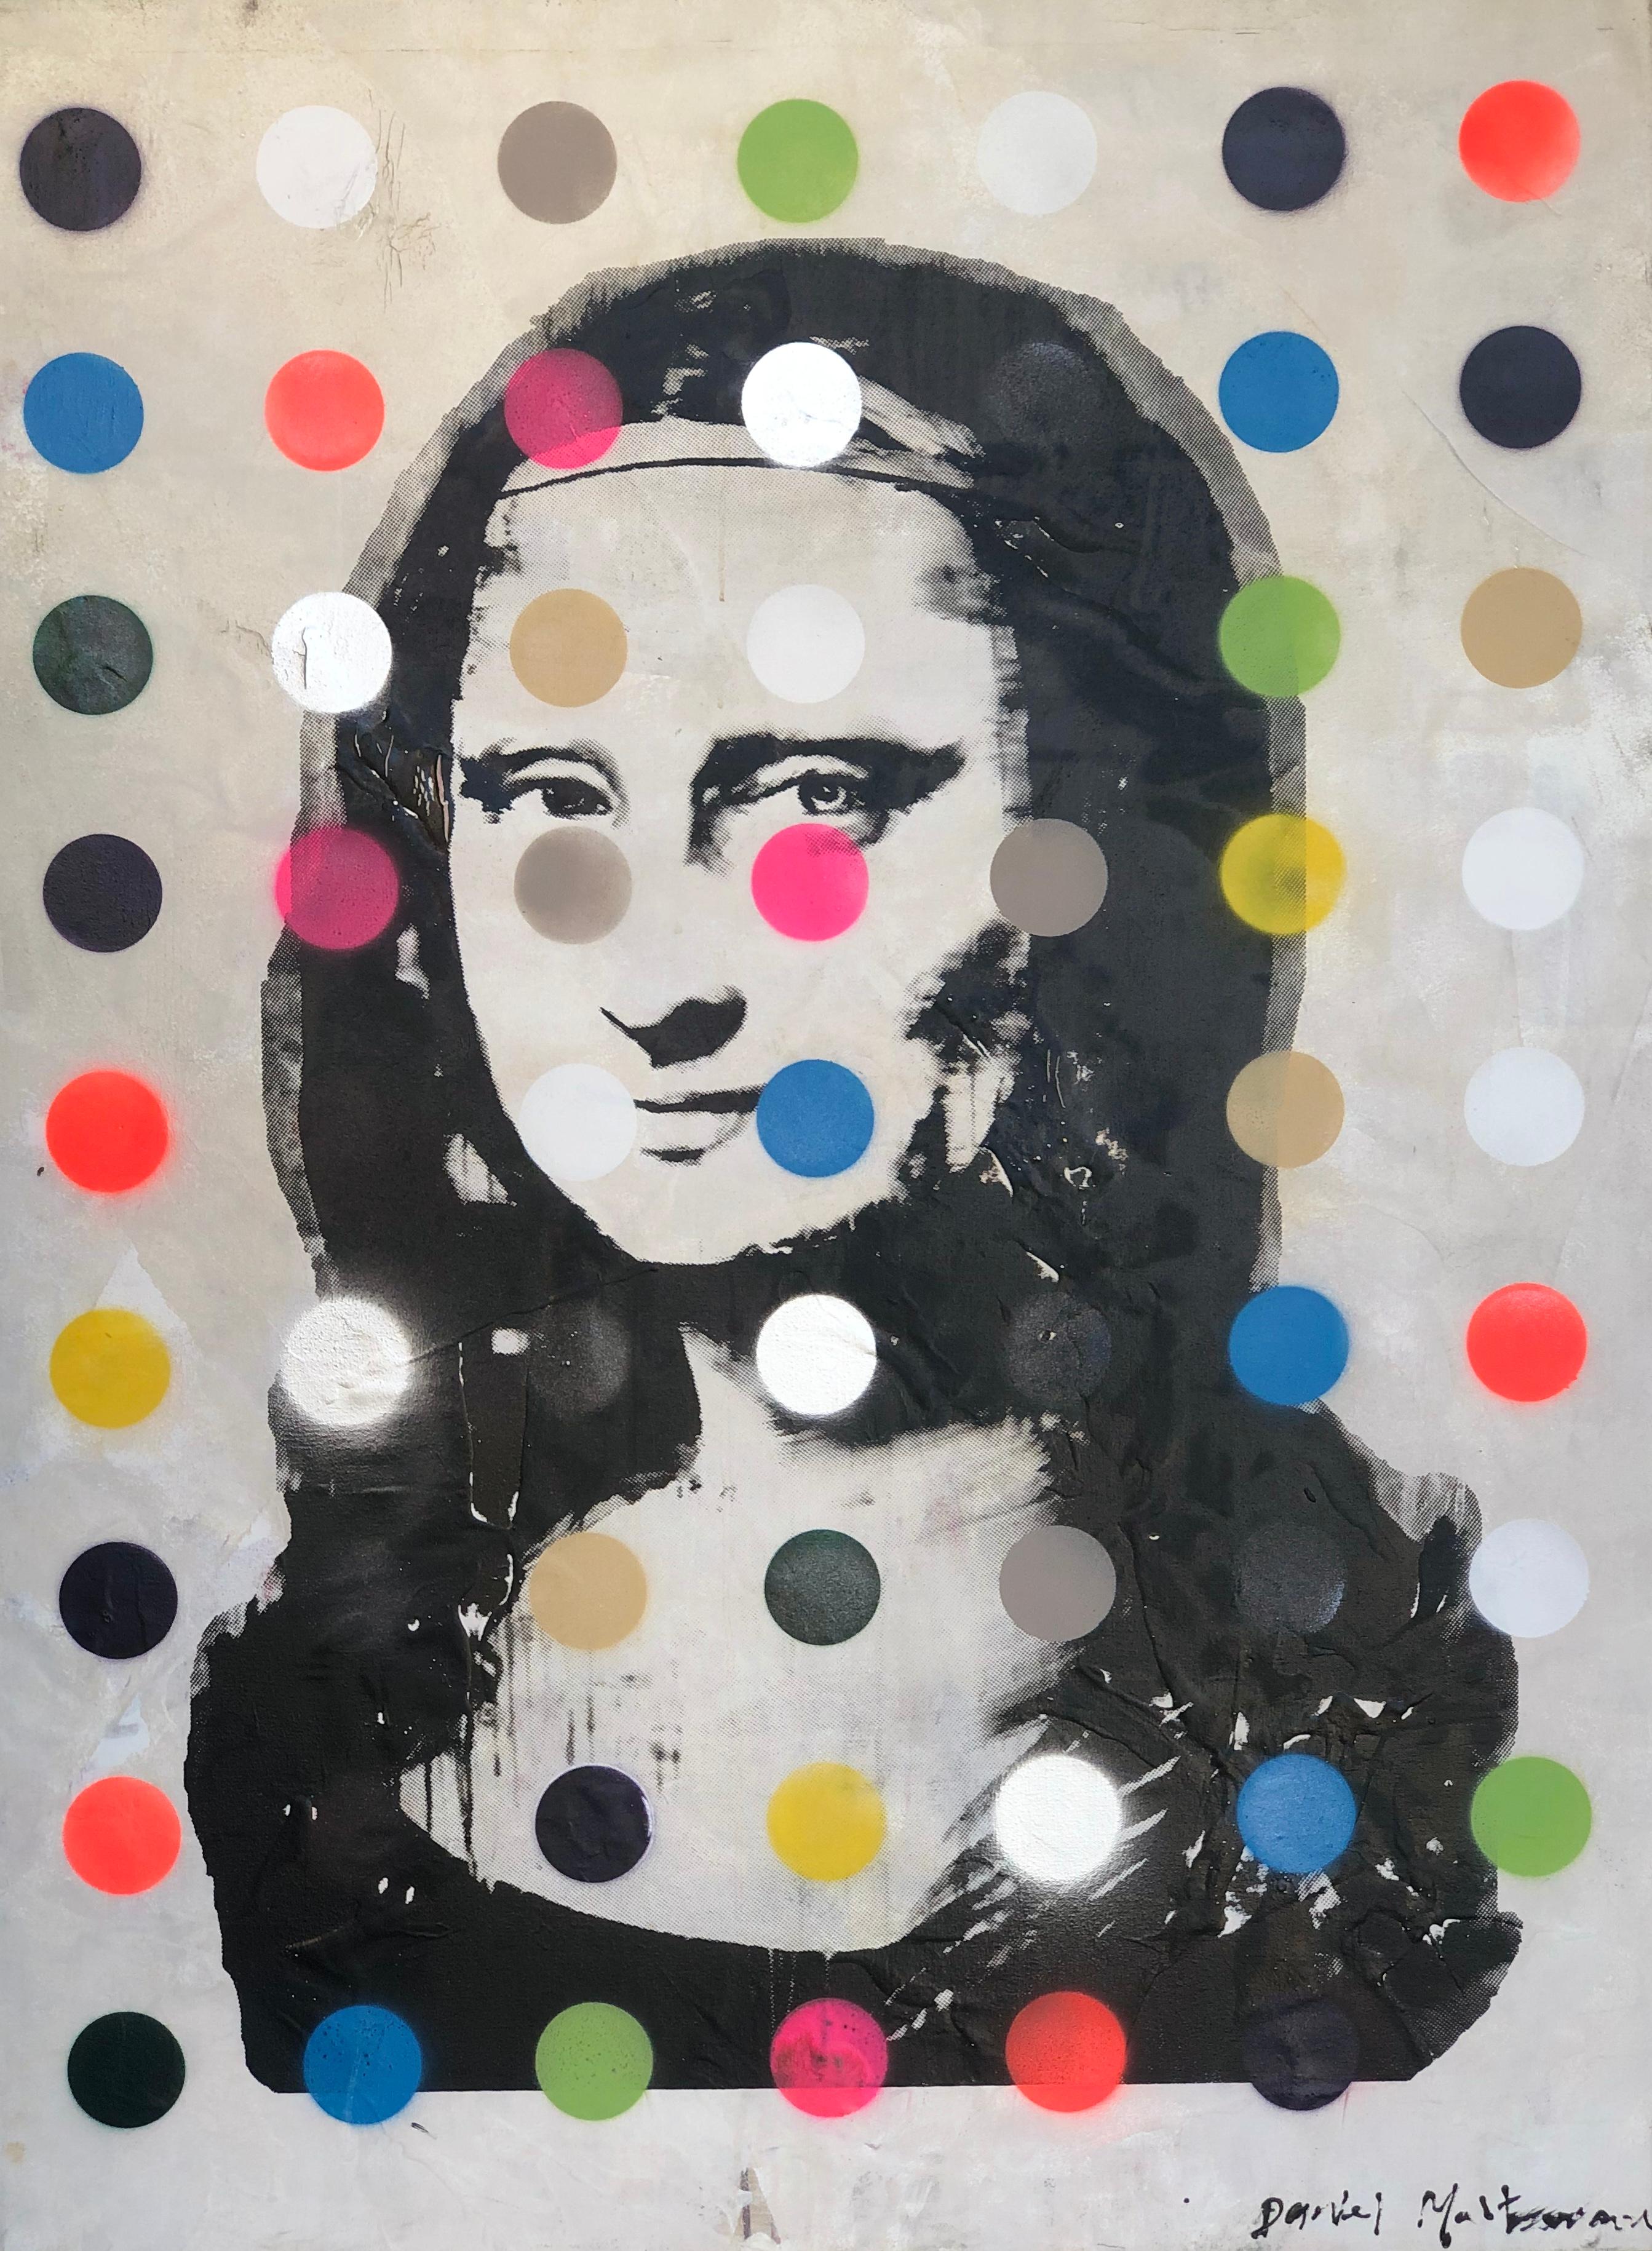 Daniel Maltzman Abstract Painting - Mona Lisa with Colored Dots